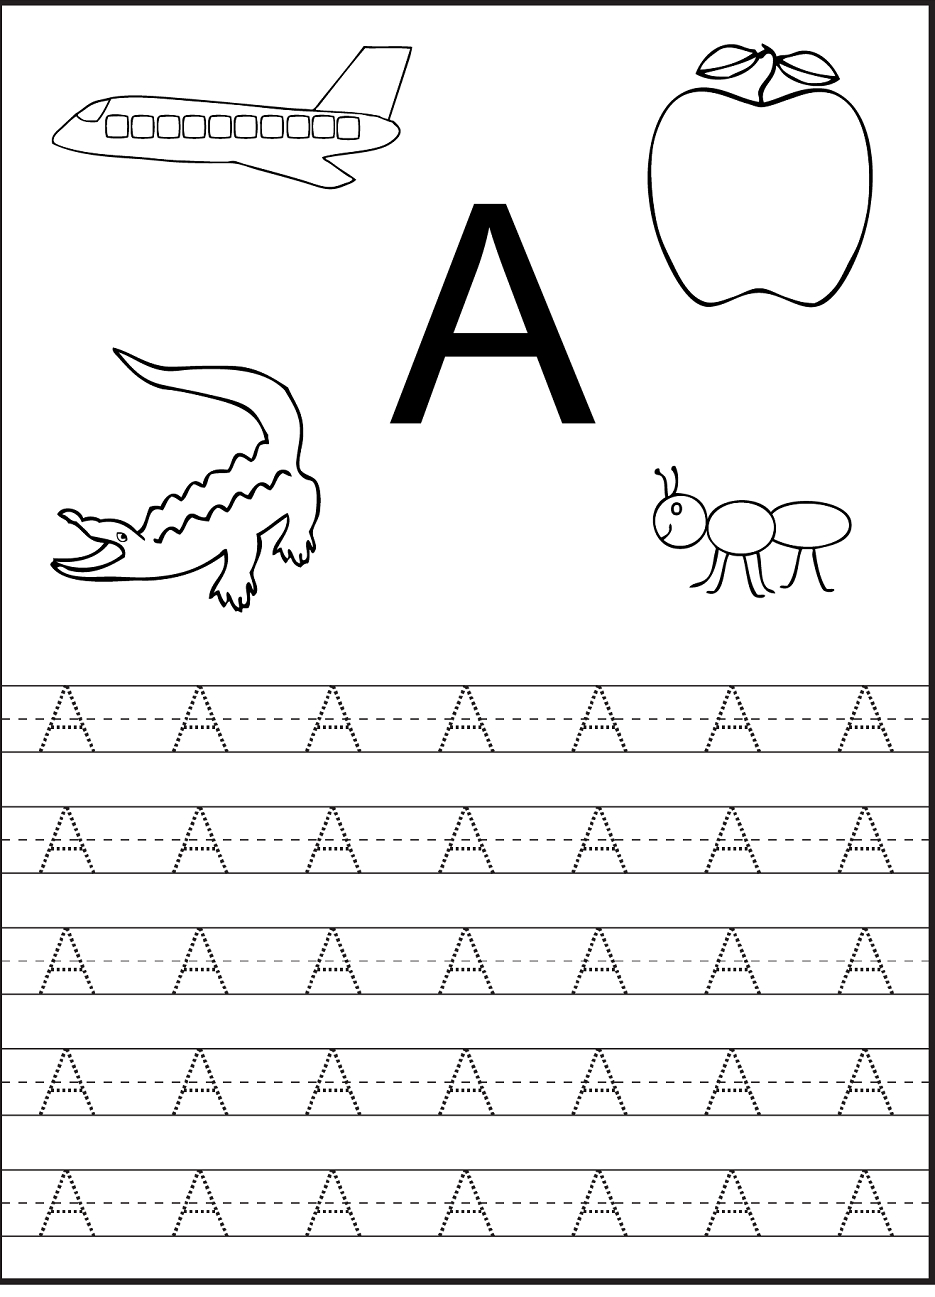 Tracing The Letter A Free Printable | Preschool Worksheets with regard to Letter I Worksheets Printable